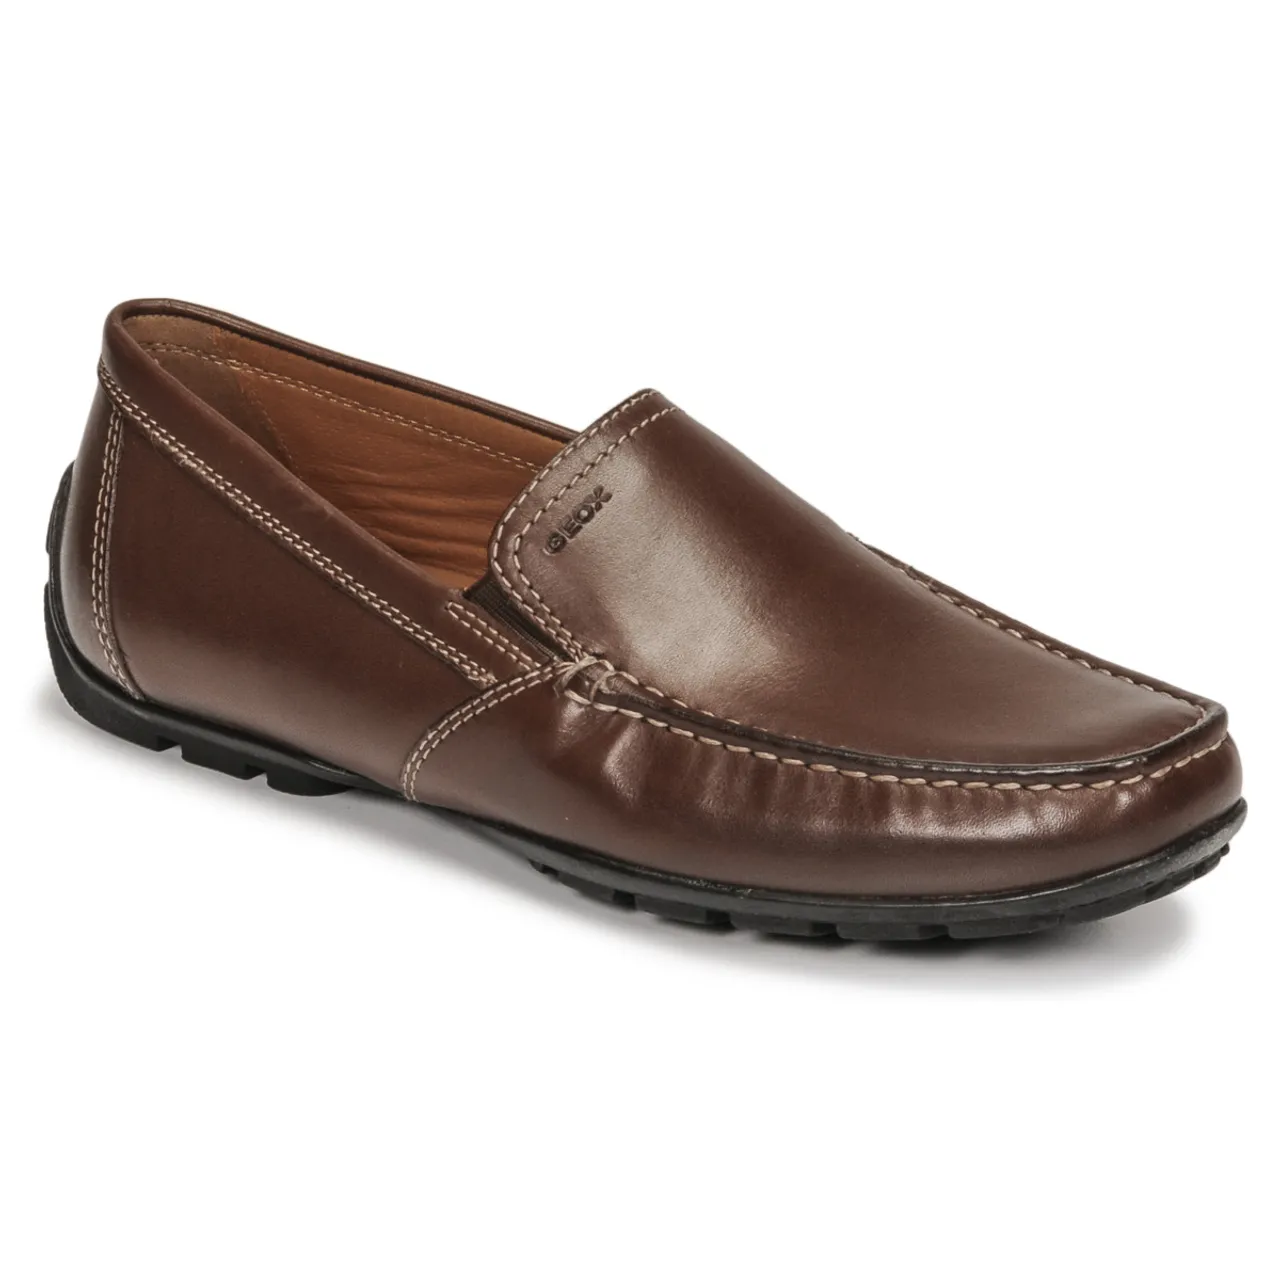 Geox  MONET  men's Loafers / Casual Shoes in Brown